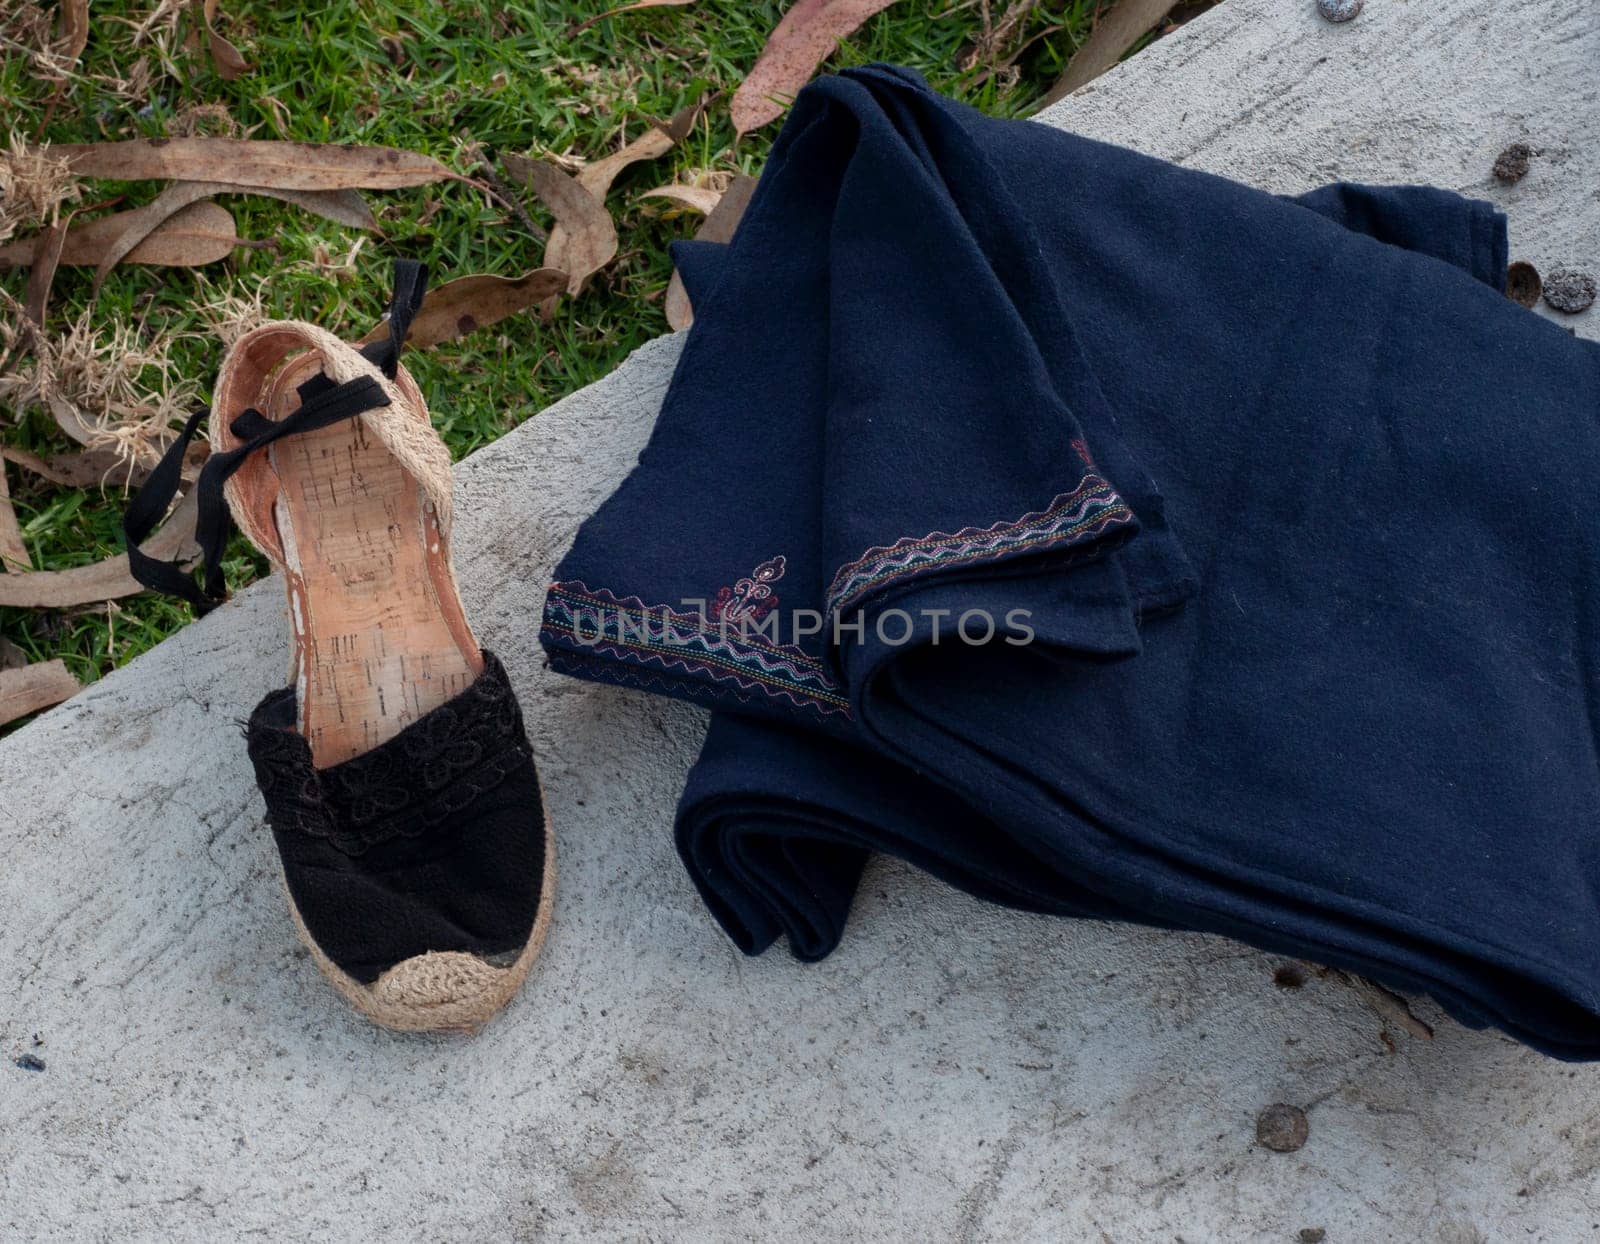 close-up of handmade footwear with hand-embroidered fabric on a field stone. High quality photo